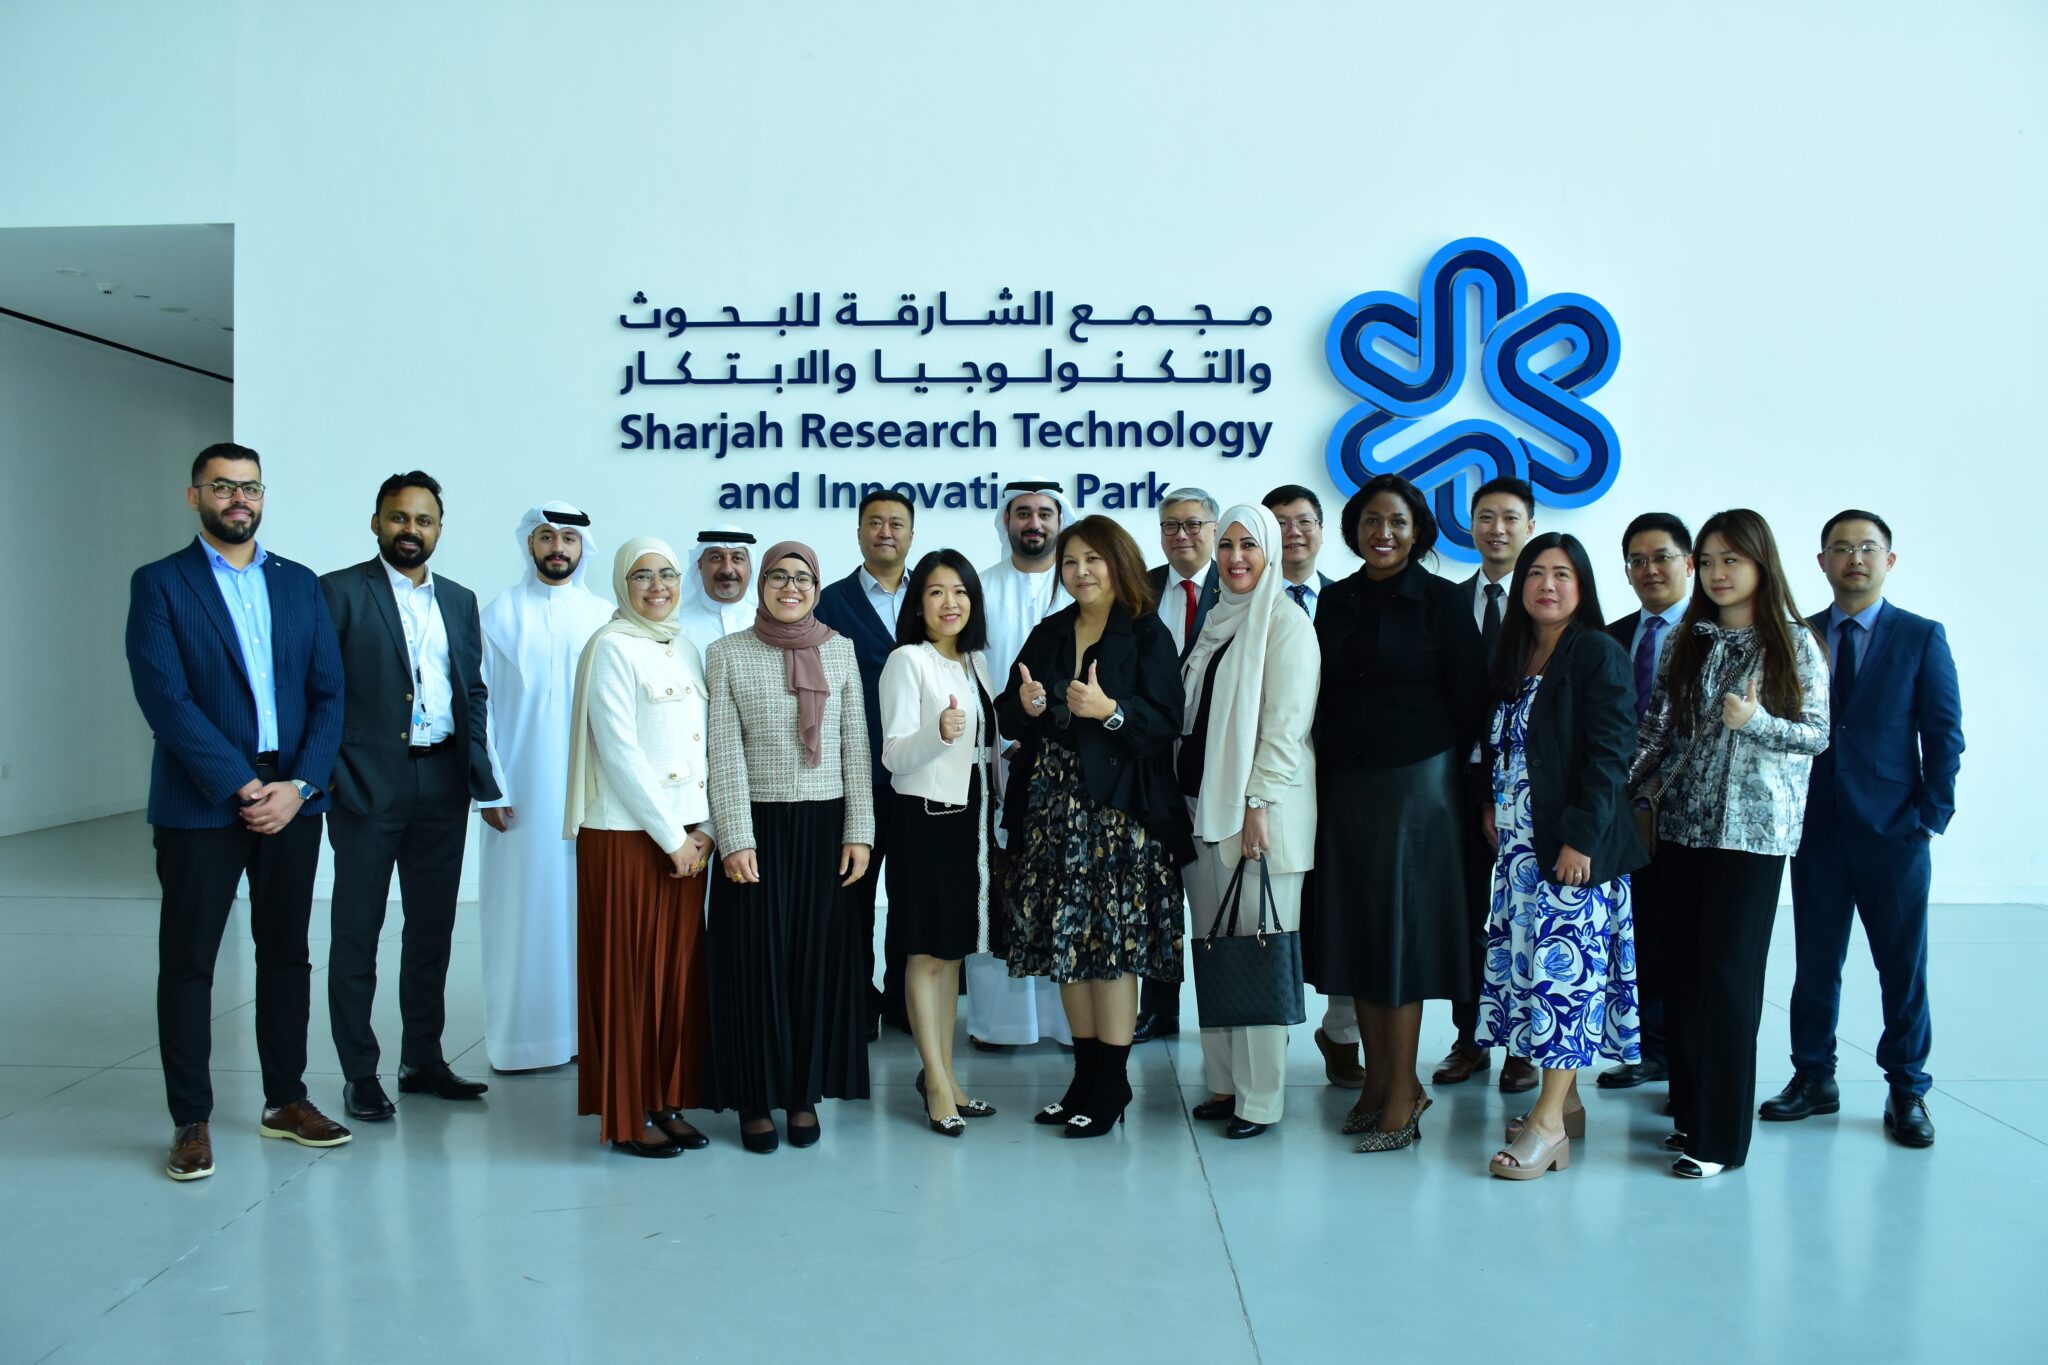 The Kent Consulting team and the Delegation concluding their visit to the Sharjah Research Technology and Innovation Park